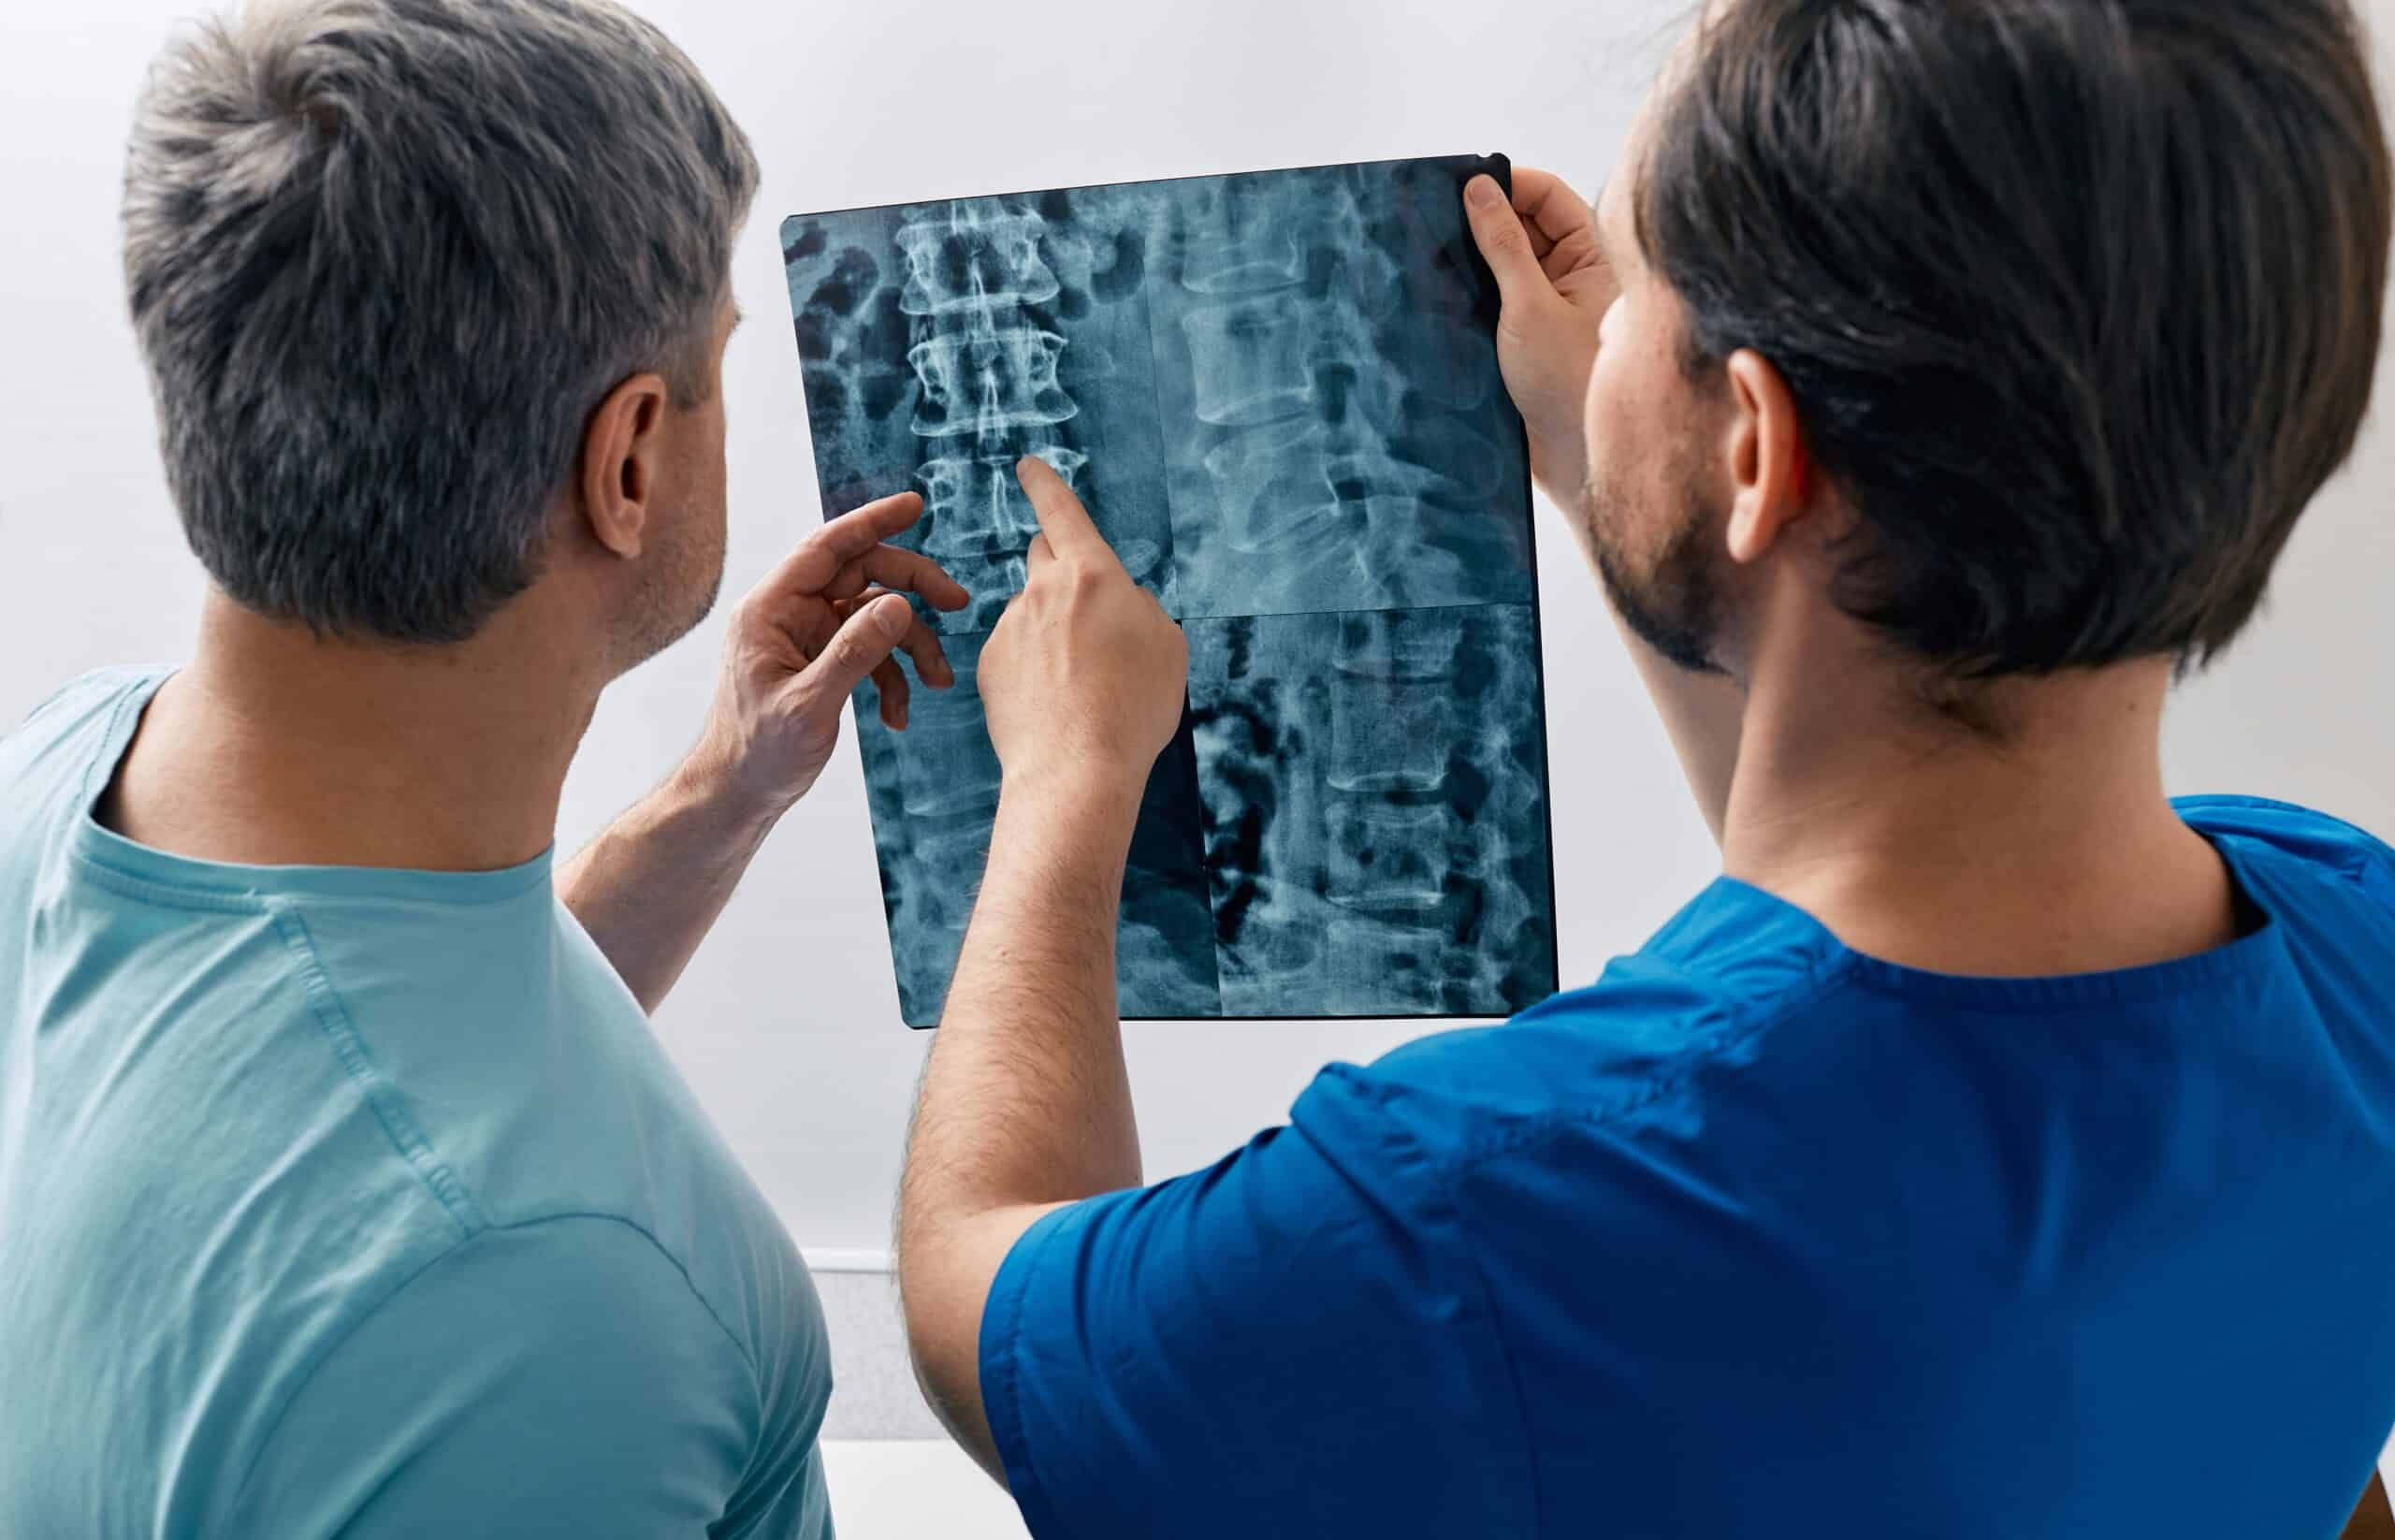 How Much Is My Spinal Cord Injury Worth in a Lawsuit